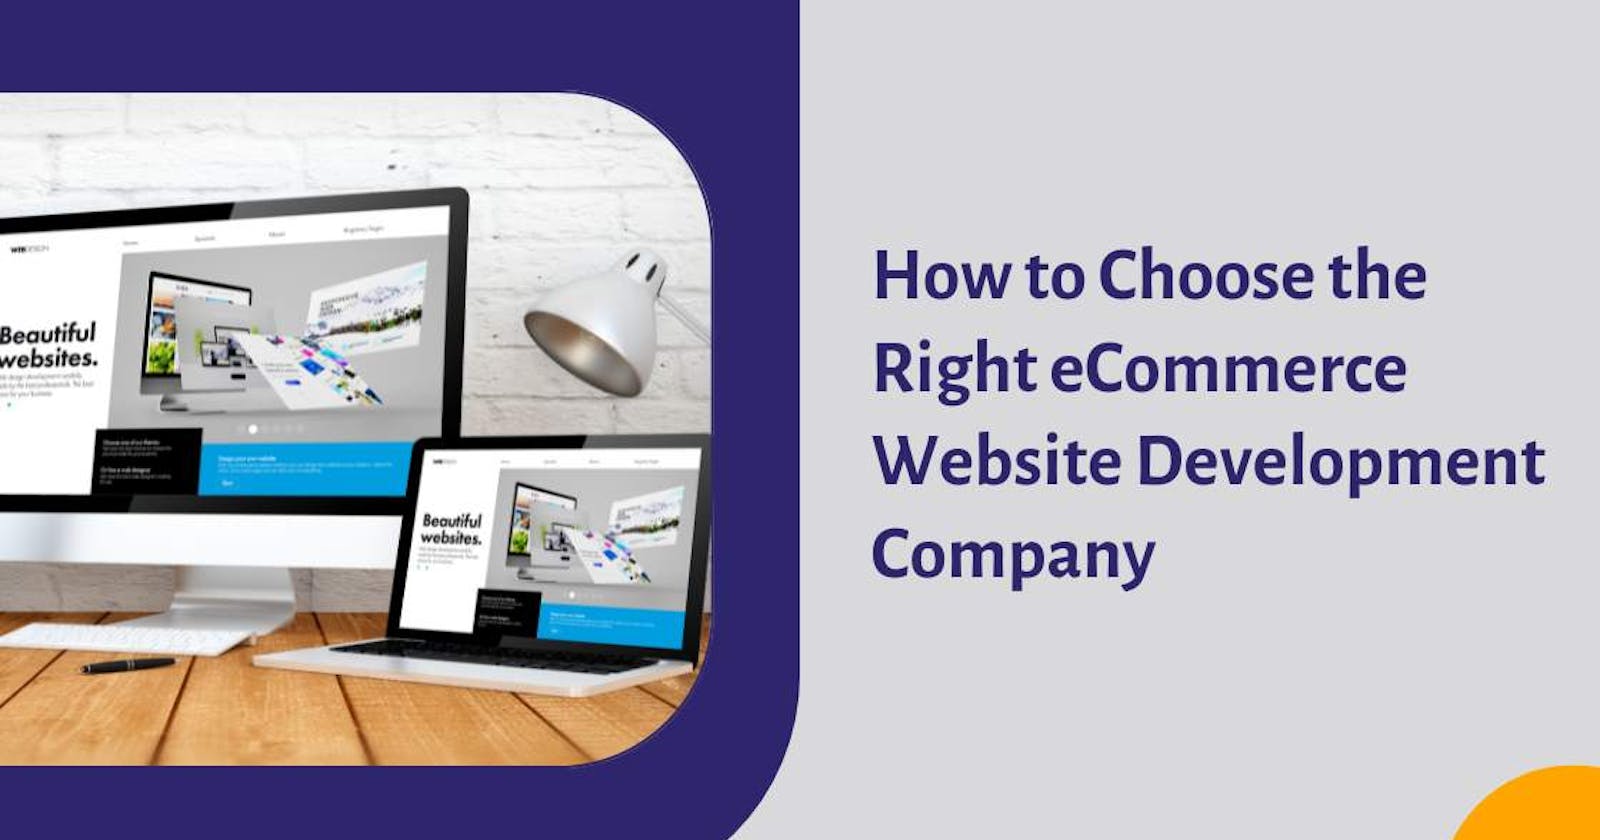 How to Choose the Right eCommerce Website Development Company